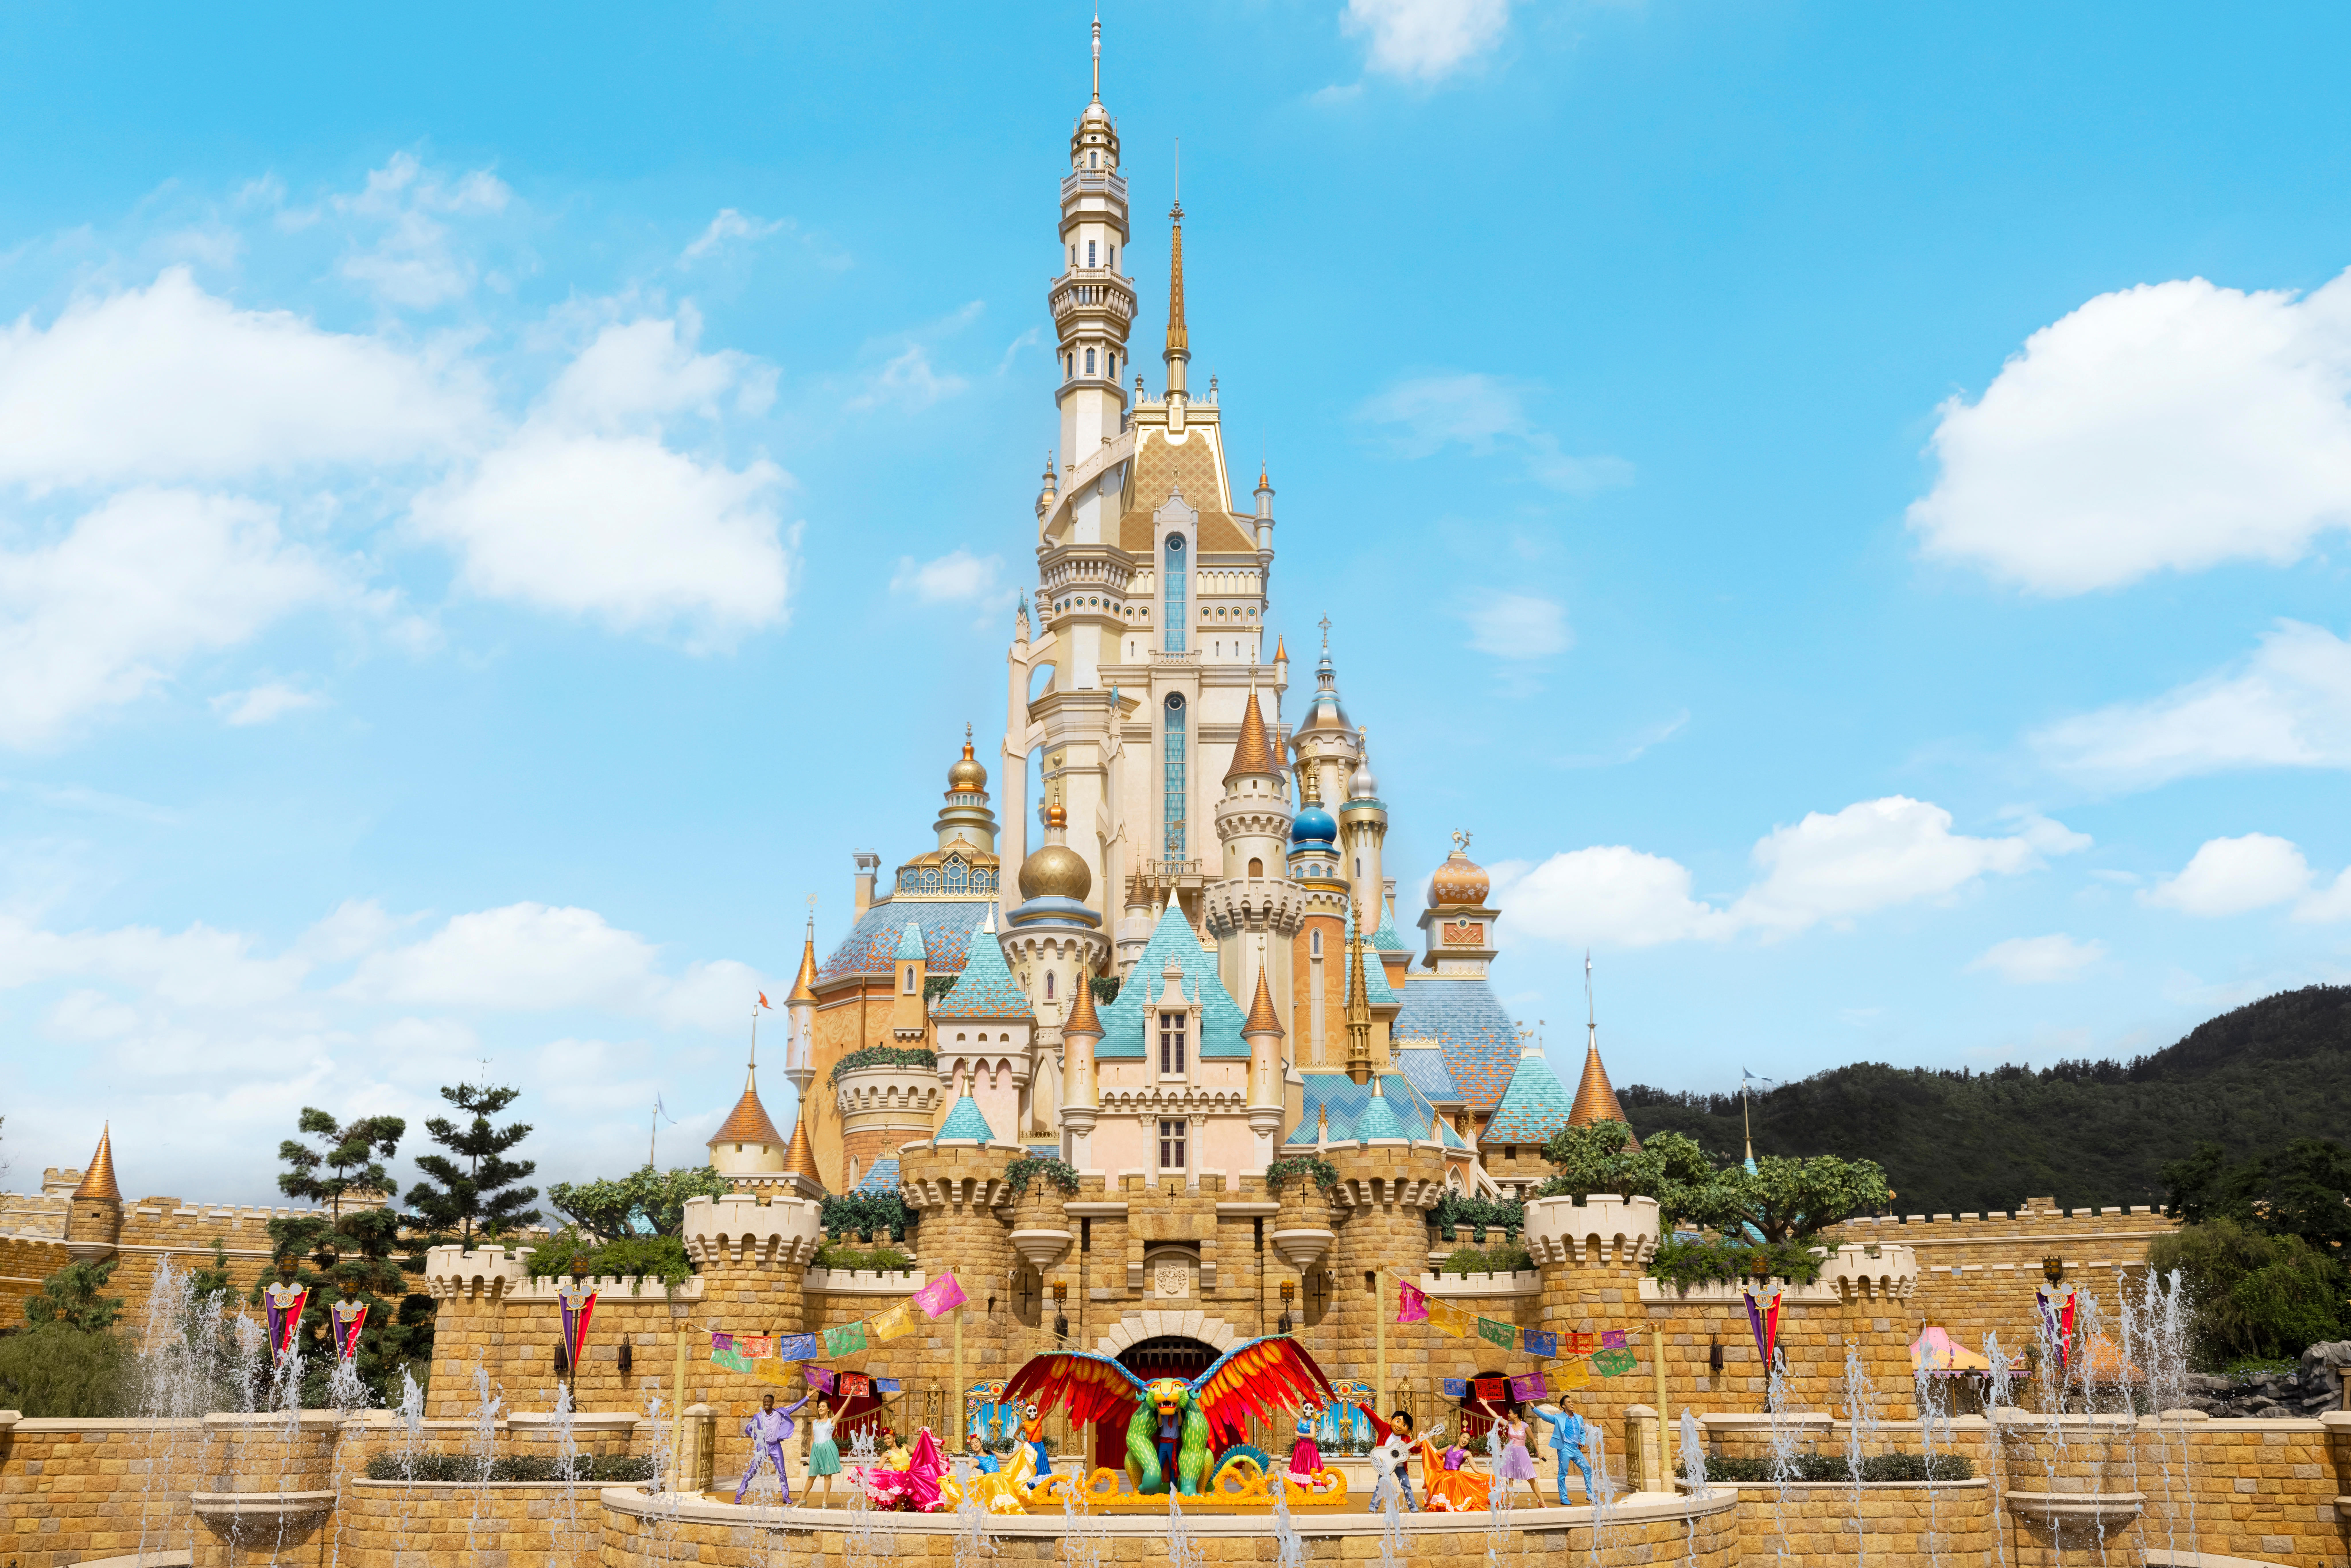 Hong Kong Disneyland Park Tickets Get Access to the Theme Areas